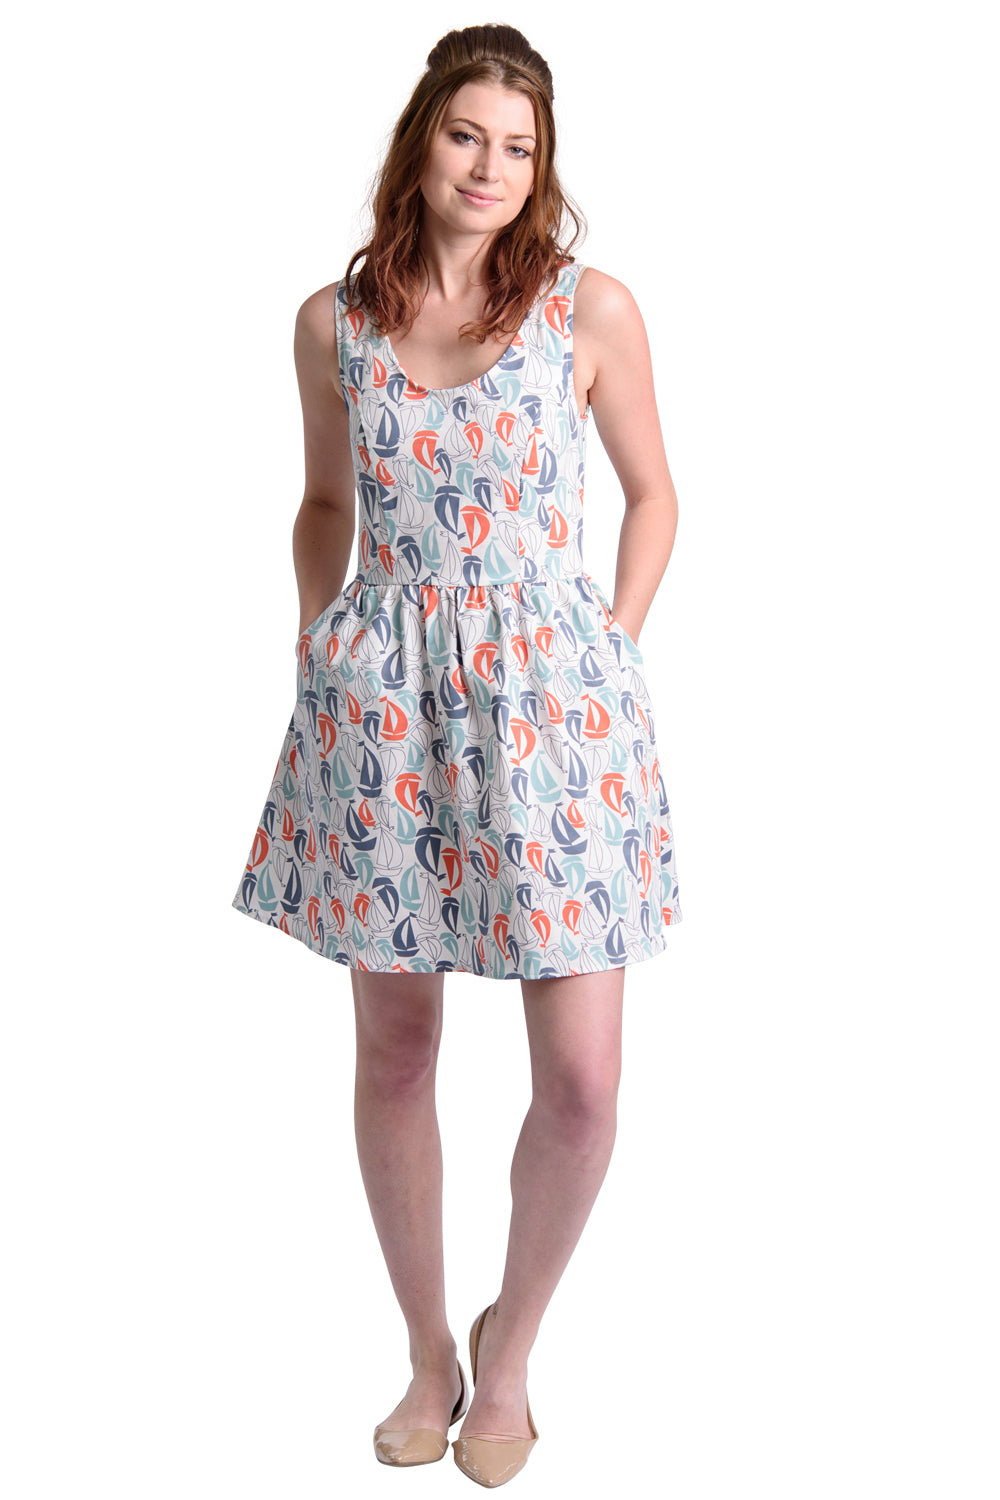 Model in white fit and flare dress with red and blue sailboat print and pockets